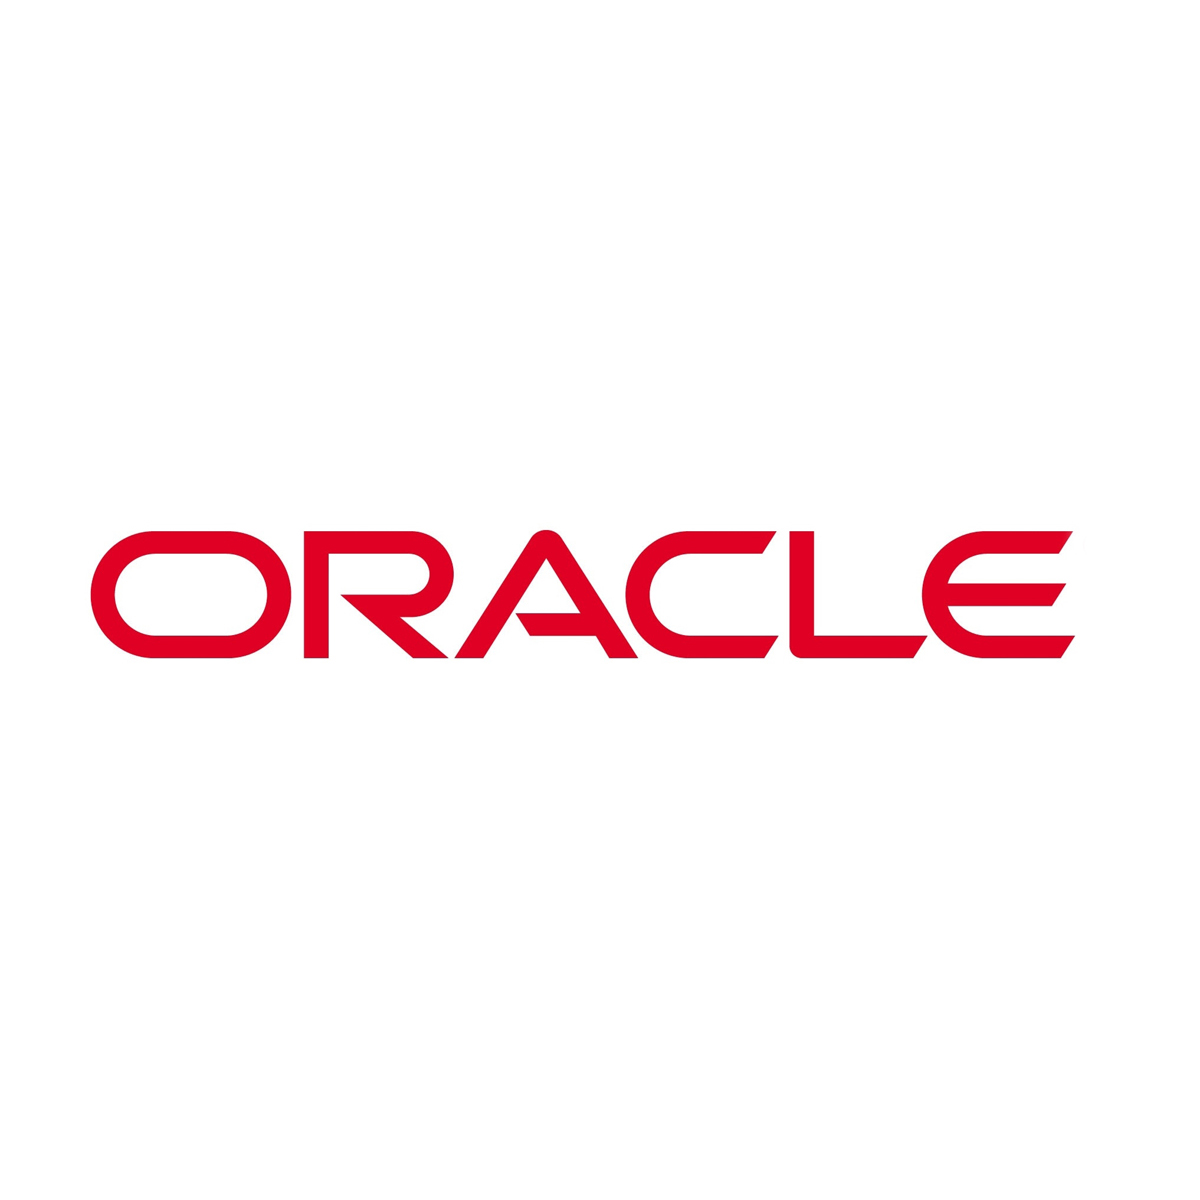  Leading Cloud CRM Solution Logo: Oracle